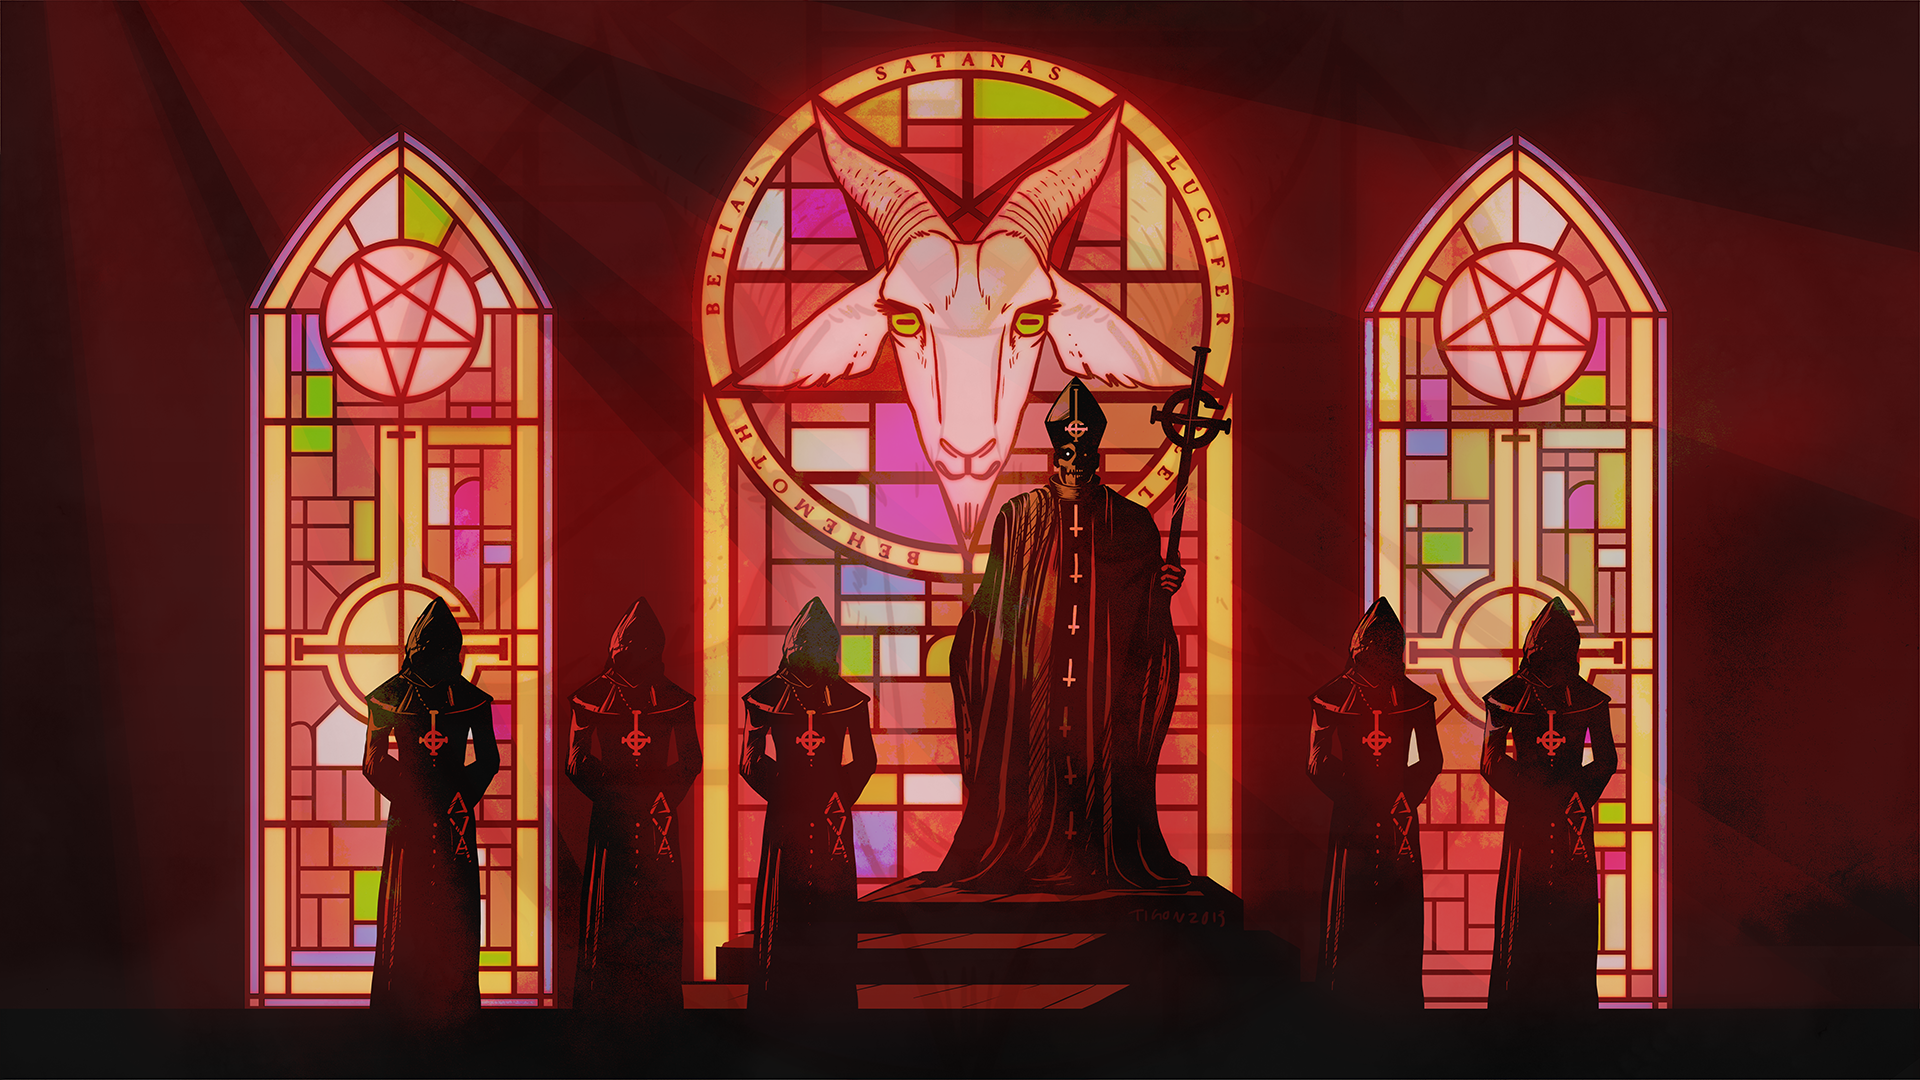 General 1920x1080 Lucifer church Papa Emeritus ghost Ghost B.C. red stained glass artwork goats pentagram Satanism